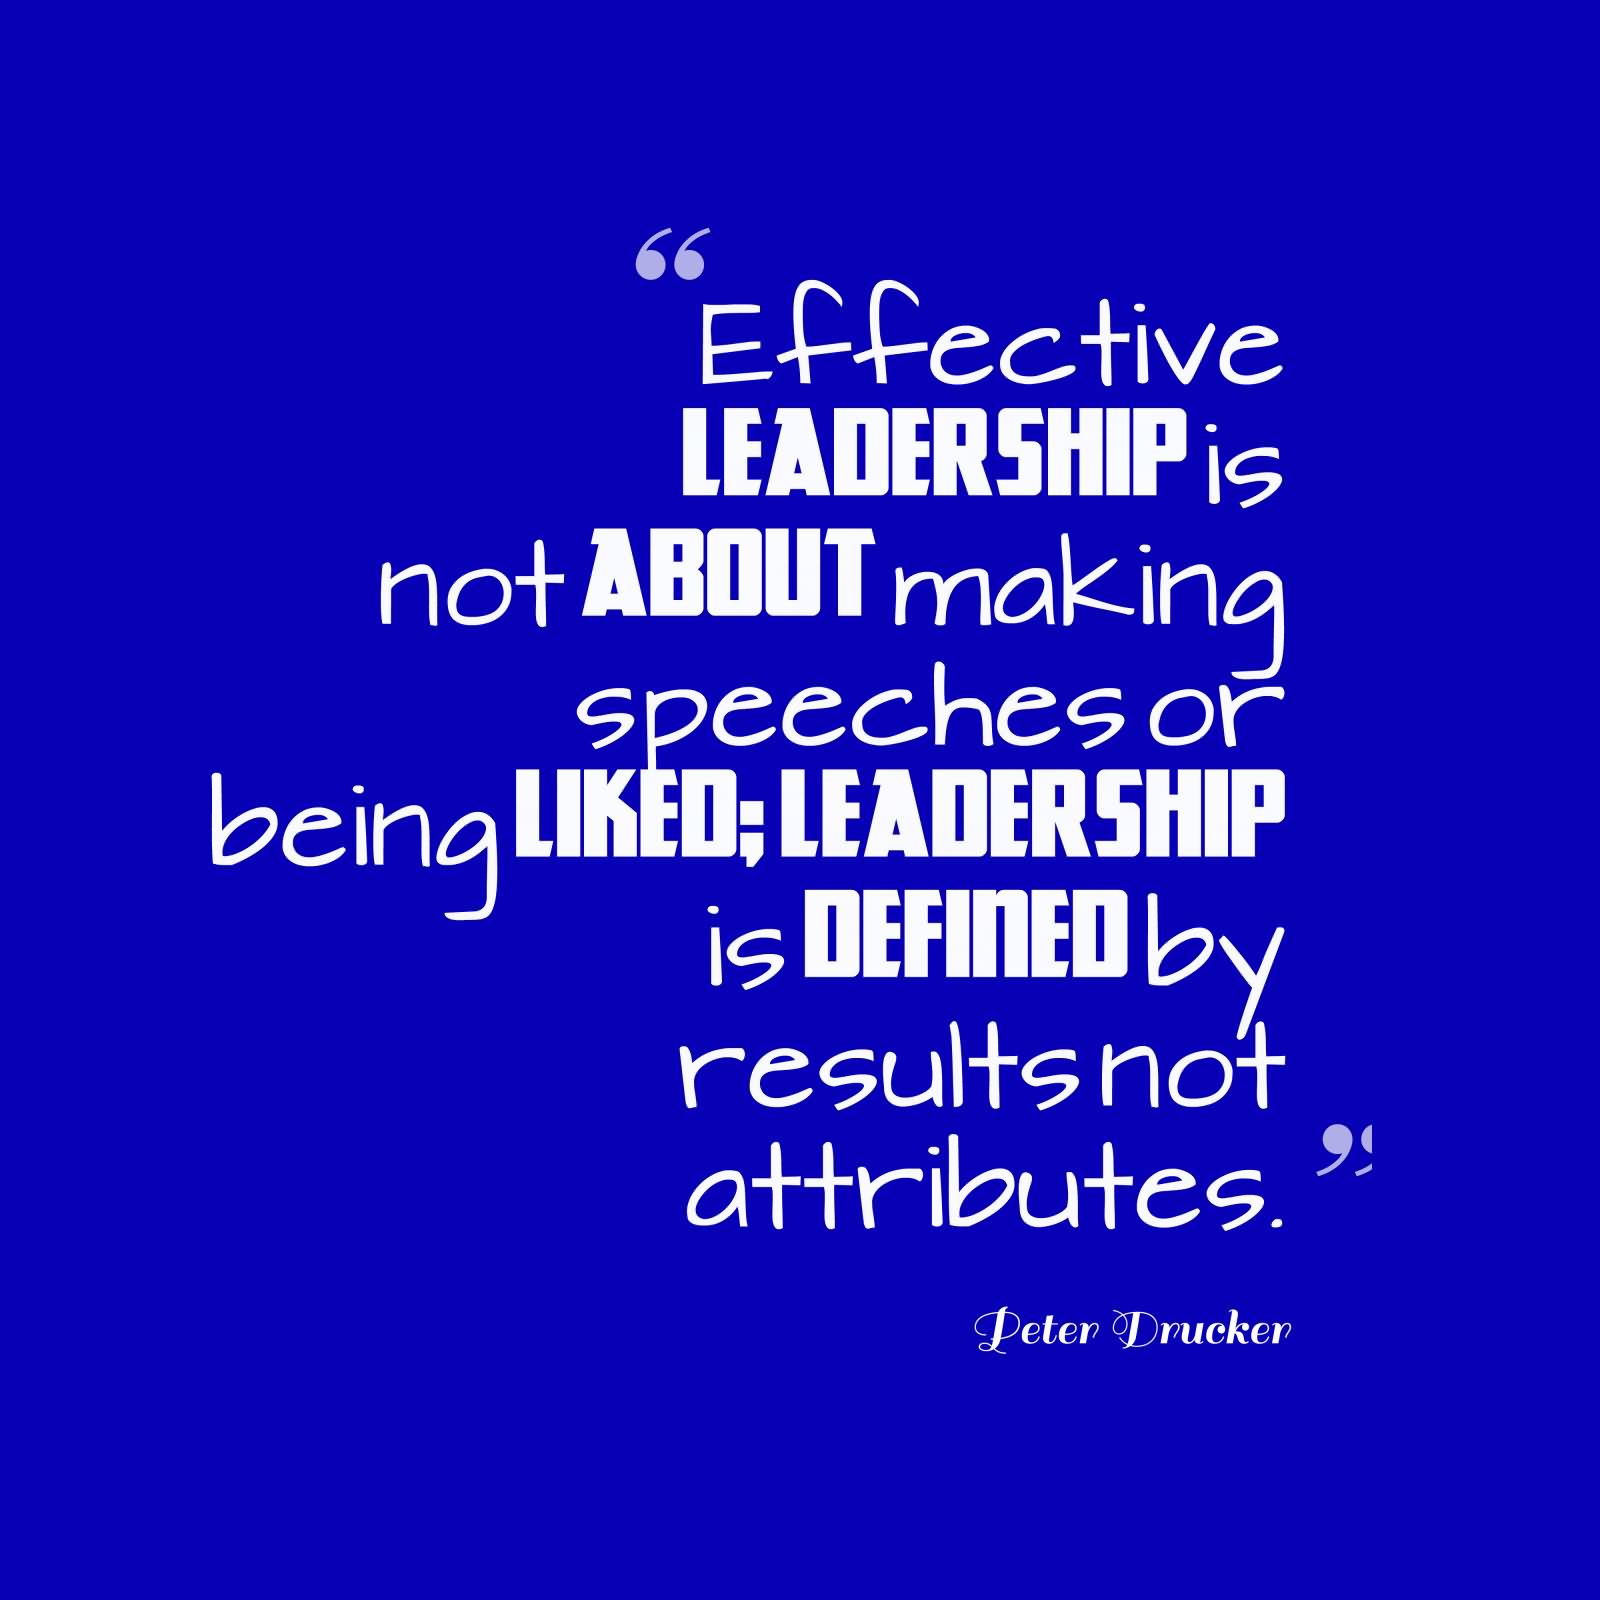 Effective Leadership Not About Making Speeches Or Being Liked Leadership Is Defined By Results Not Attributes.